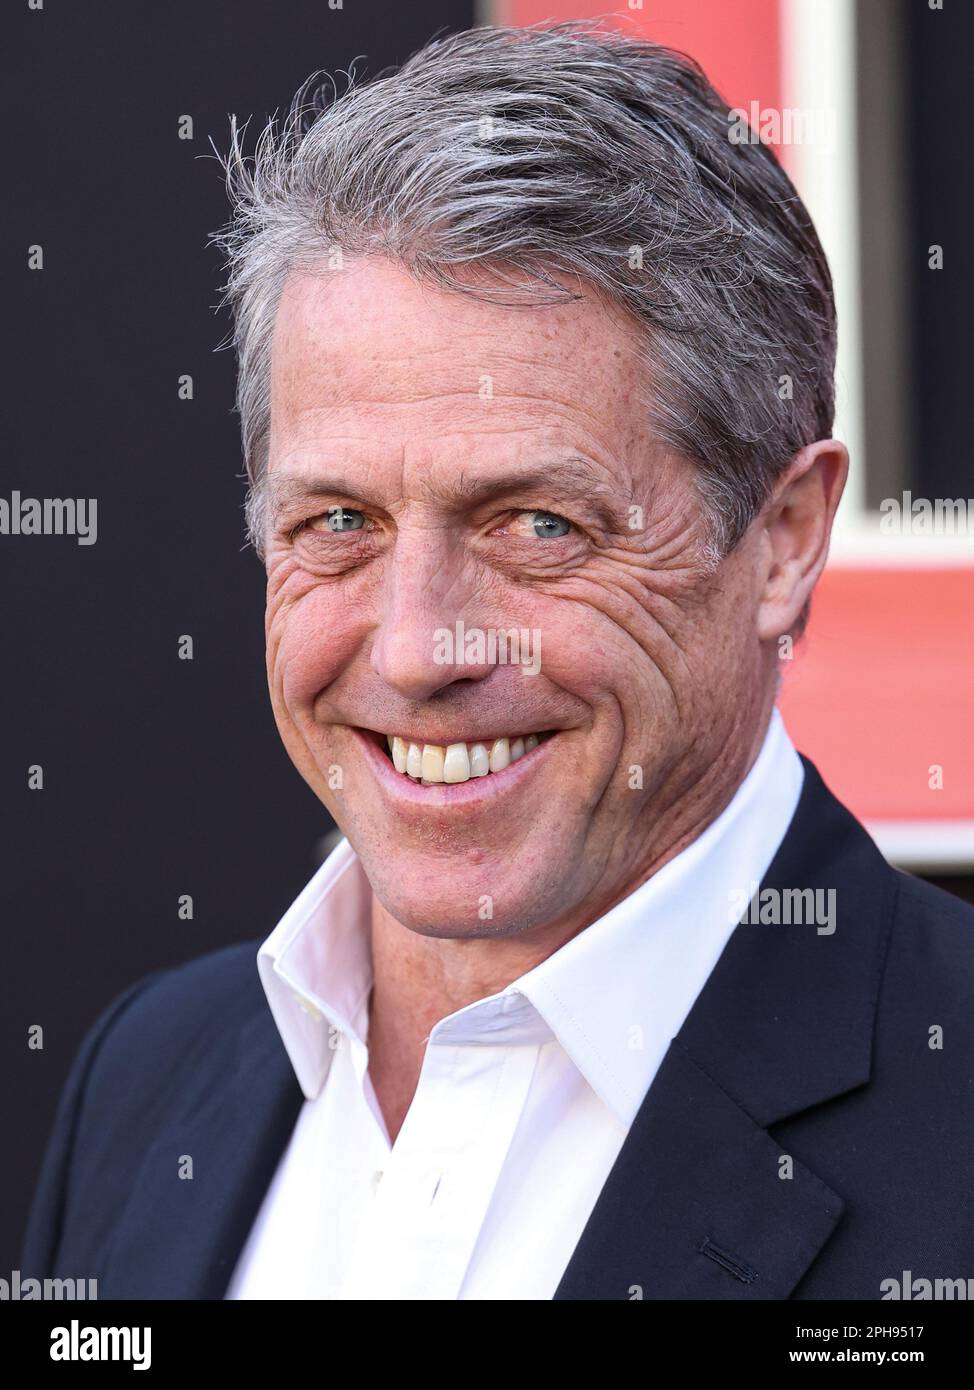 WESTWOOD, LOS ANGELES, CALIFORNIA, USA - MARCH 26: English actor Hugh Grant arrives at the Los Angeles Premiere Of Paramount Pictures' and eOne's 'Dungeons & Dragons: Honor Among Thieves' held at the Regency Village Theatre on March 26, 2023 in Westwood, Los Angeles, California, United States. (Photo by Xavier Collin/Image Press Agency) Stock Photo